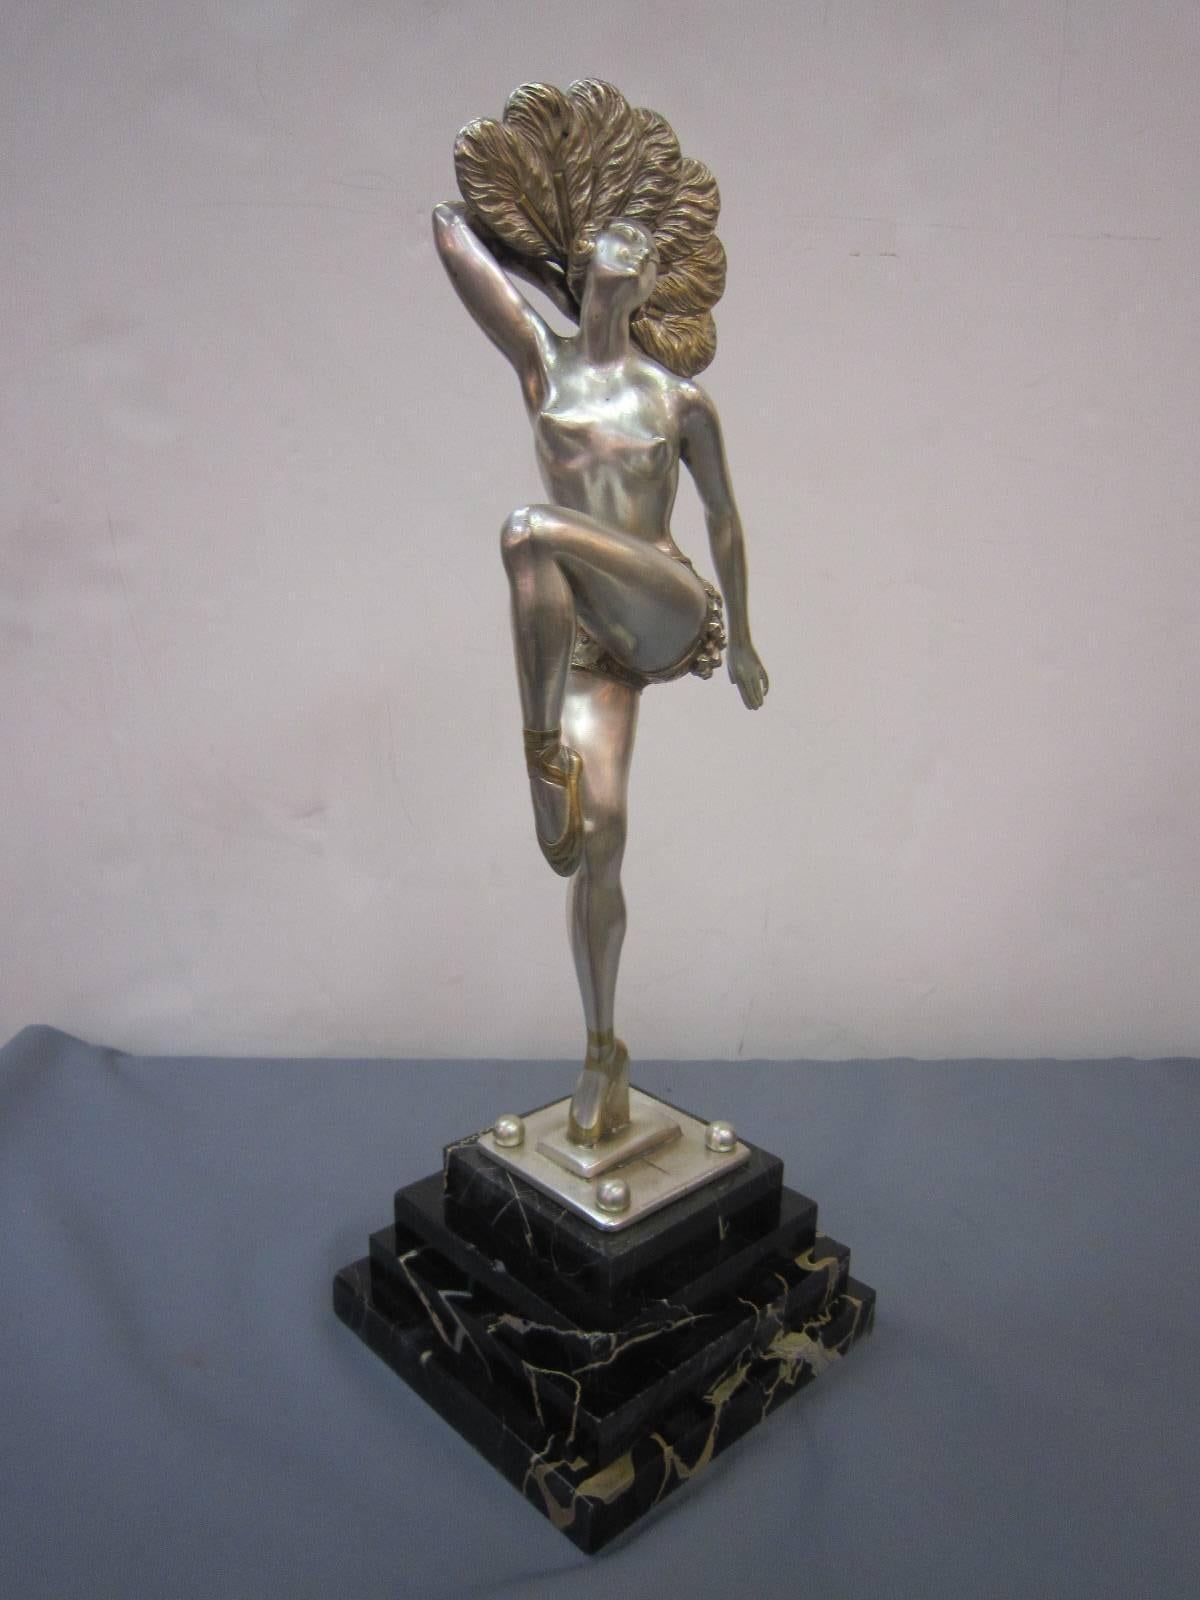 Original and graceful French Modernist statue of a female dancer with one foot up wearing ballet slippers and fashionable roaring 1920s garb. The figurine is finished in a silvered bronze with parcel-gilt accents and mounted on a stepped black and